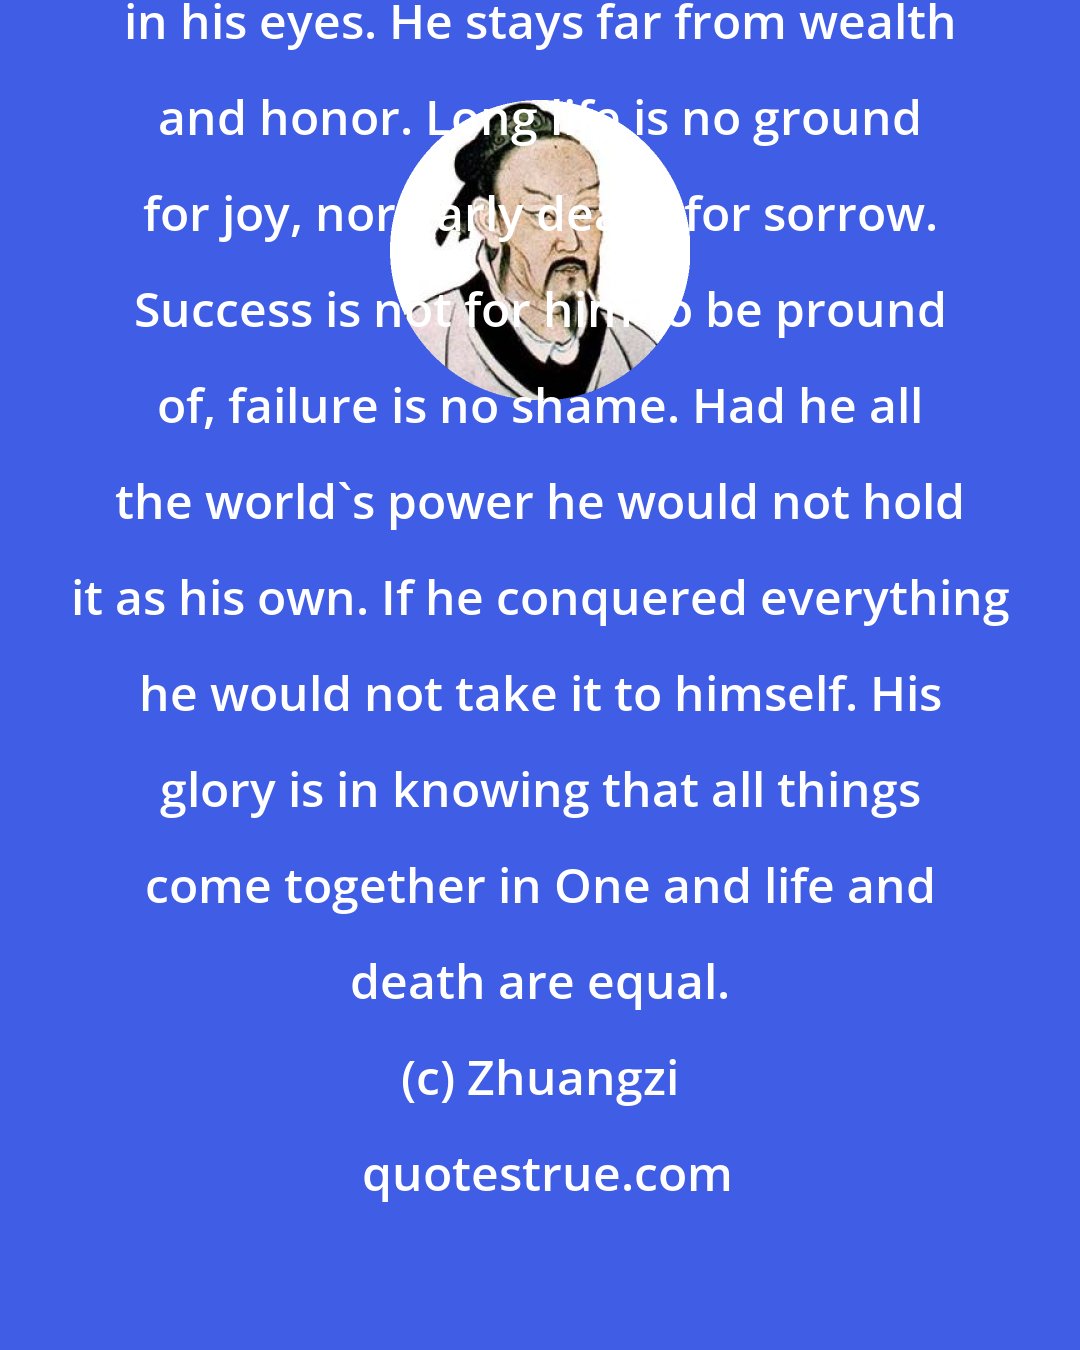 Zhuangzi: Goods and possessions are no gain in his eyes. He stays far from wealth and honor. Long life is no ground for joy, nor early death for sorrow. Success is not for him to be pround of, failure is no shame. Had he all the world's power he would not hold it as his own. If he conquered everything he would not take it to himself. His glory is in knowing that all things come together in One and life and death are equal.